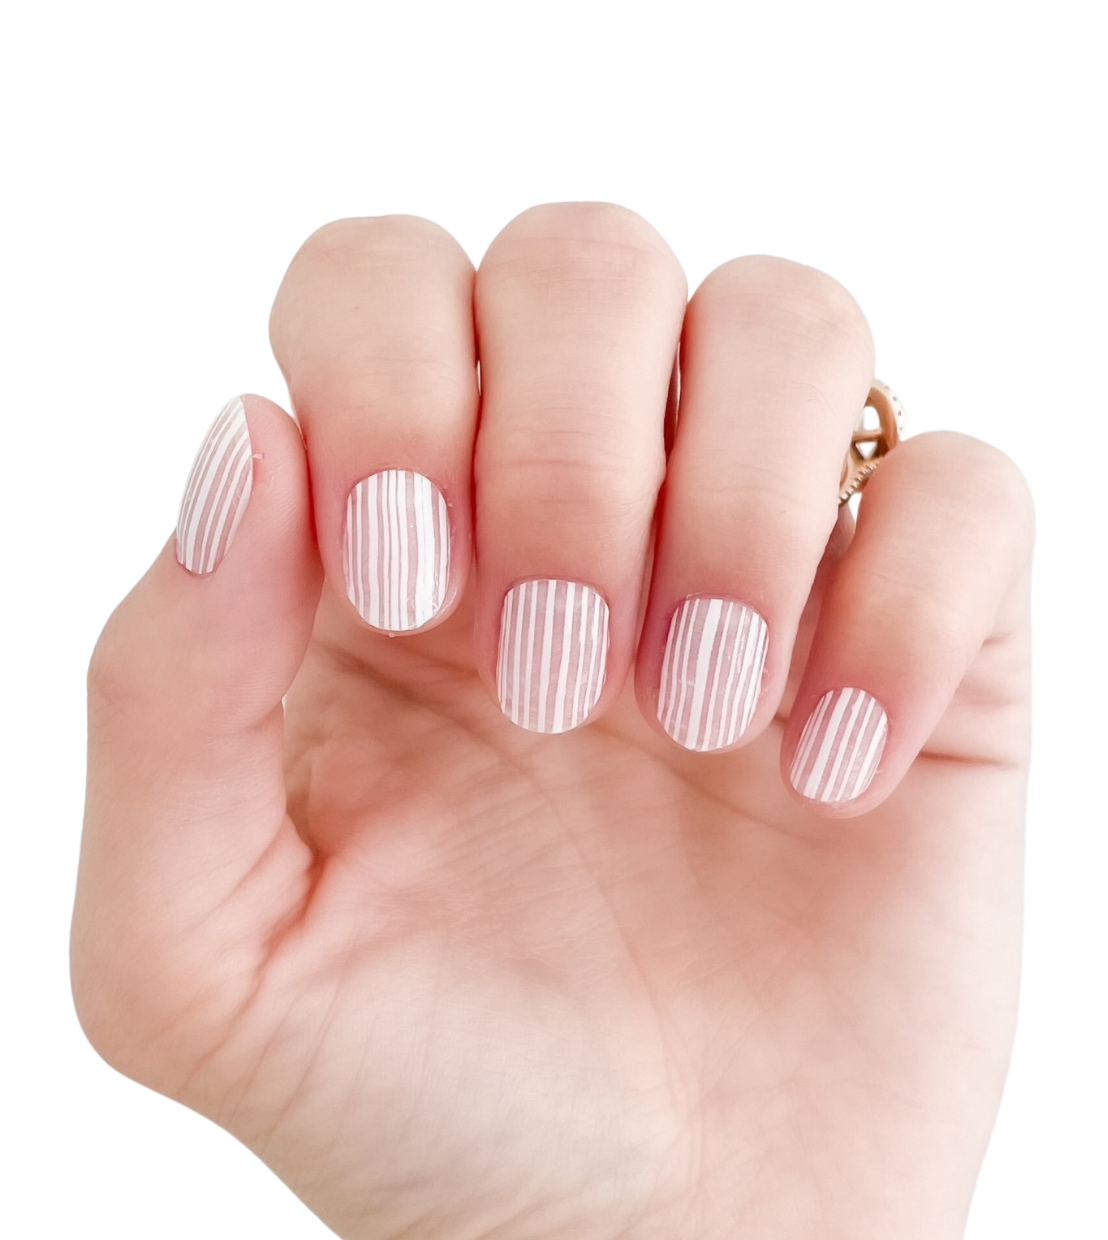 6 Reasons to Add Acrylic Nails from Red Aspen to Your Collection